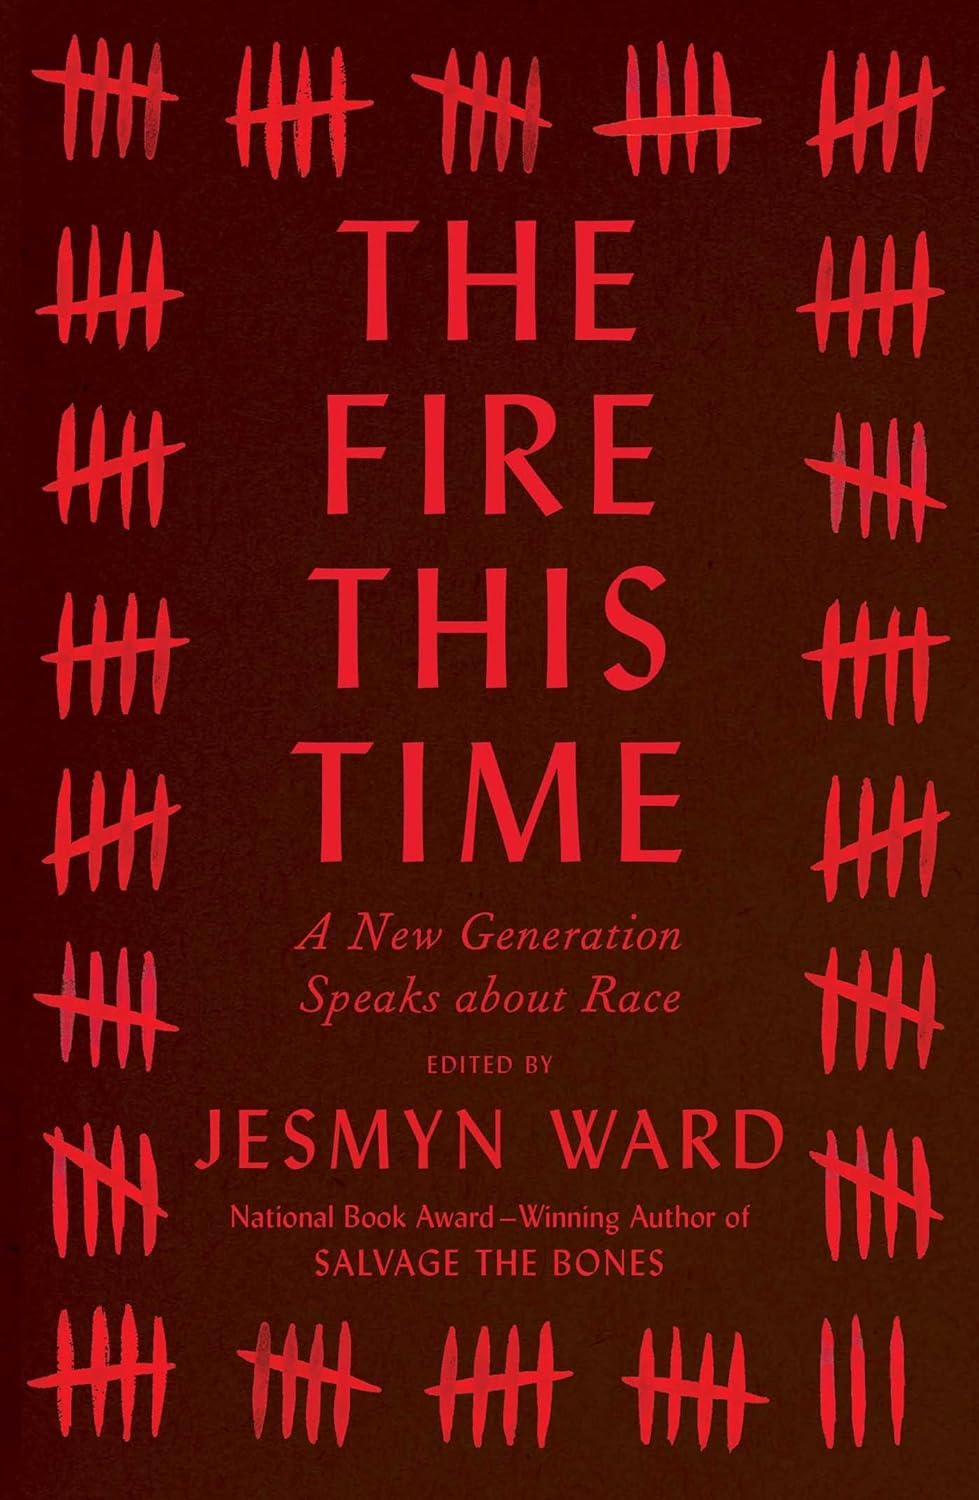 aa graphic of the cover of The Fire This Time edited by Jesmyn Ward